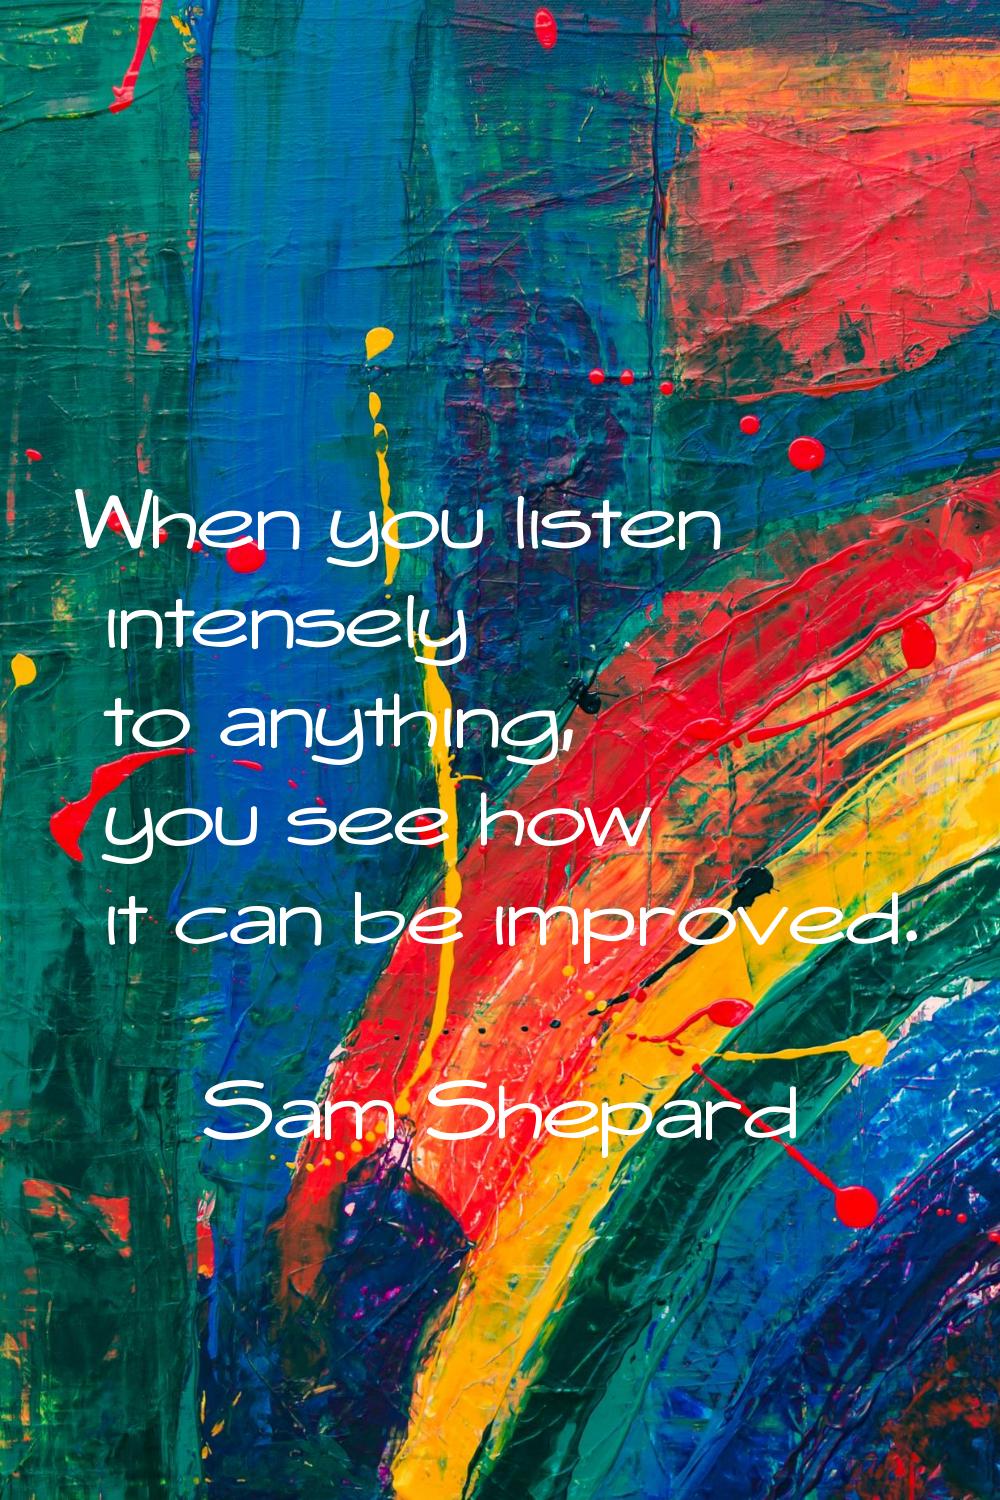 When you listen intensely to anything, you see how it can be improved.